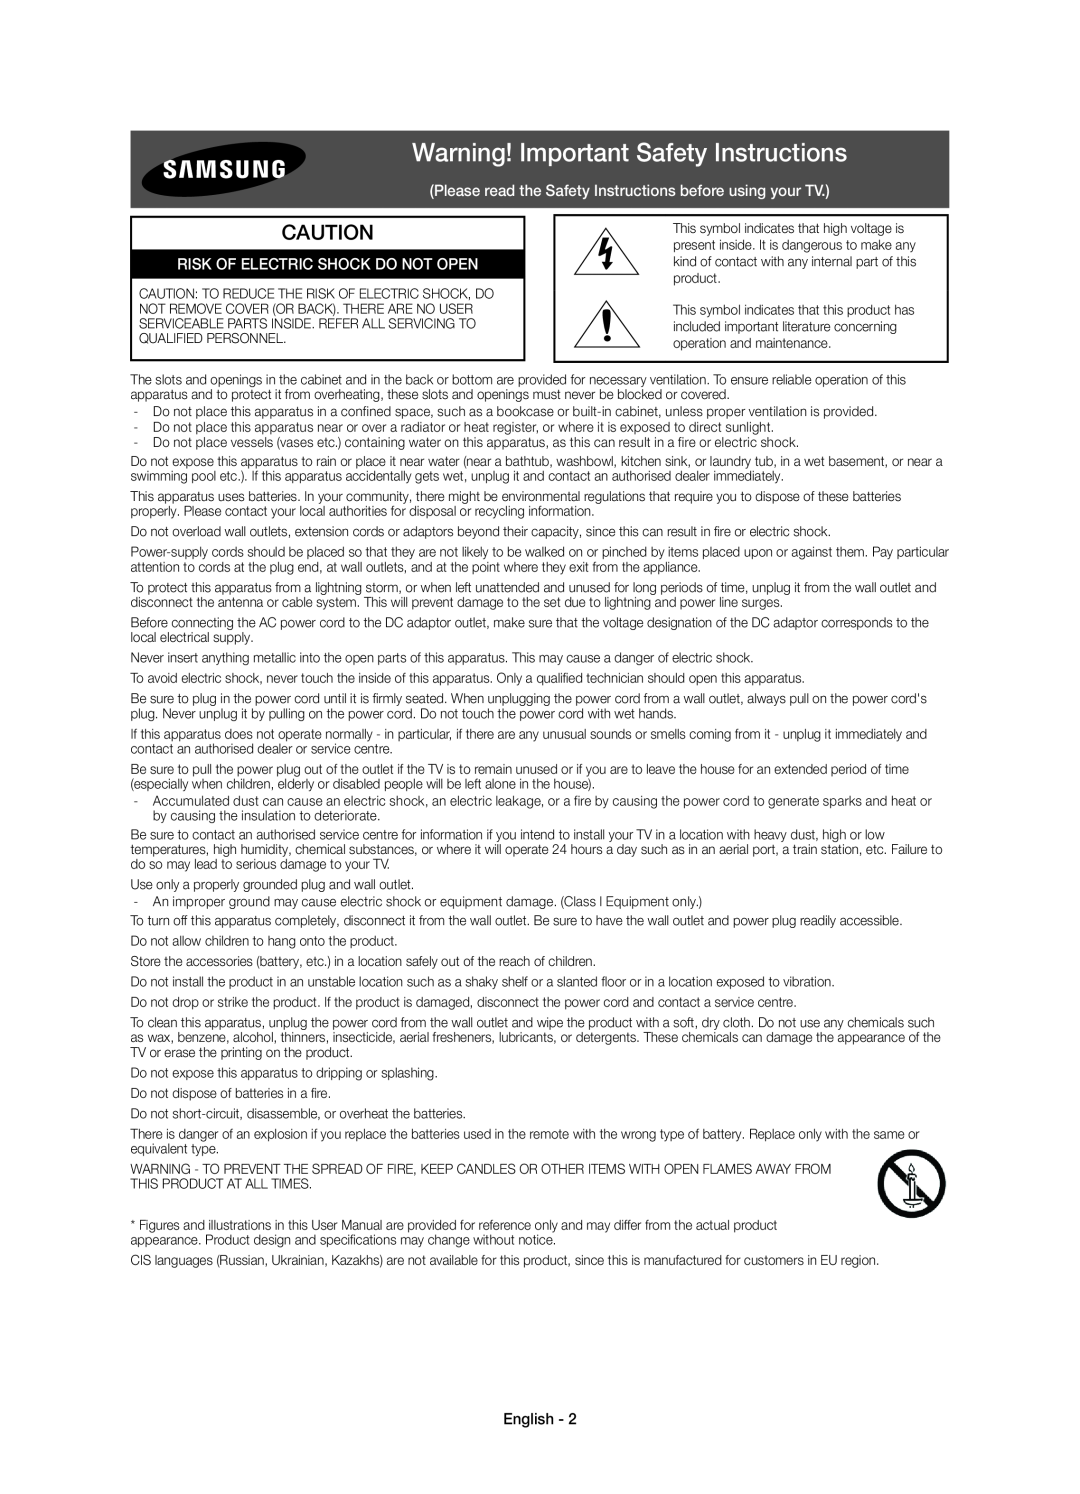 Samsung UE48JU7500TXZF Warning! Important Safety Instructions, Please read the Safety Instructions before using your TV 